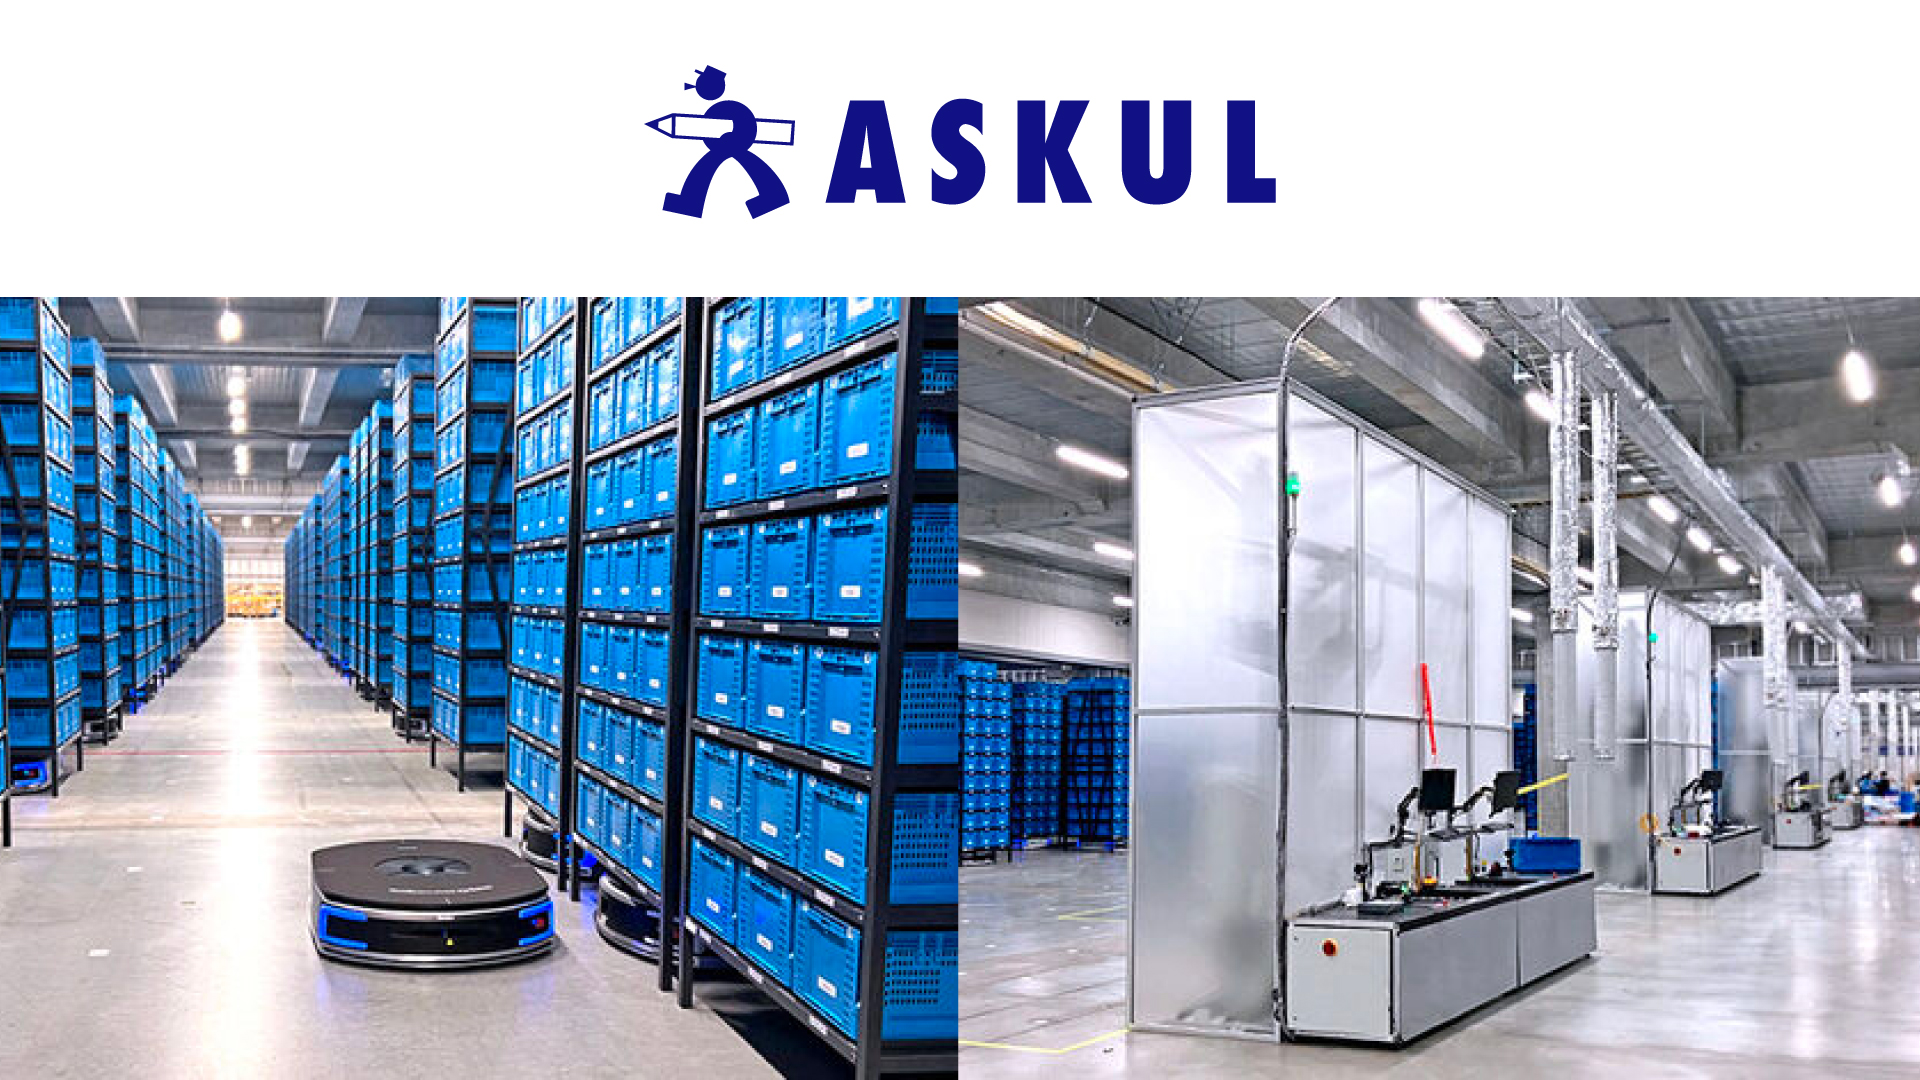 Shelf-to-Person mobile robots have been installed by Geekplus in ASKUL's Japanese warehouse 